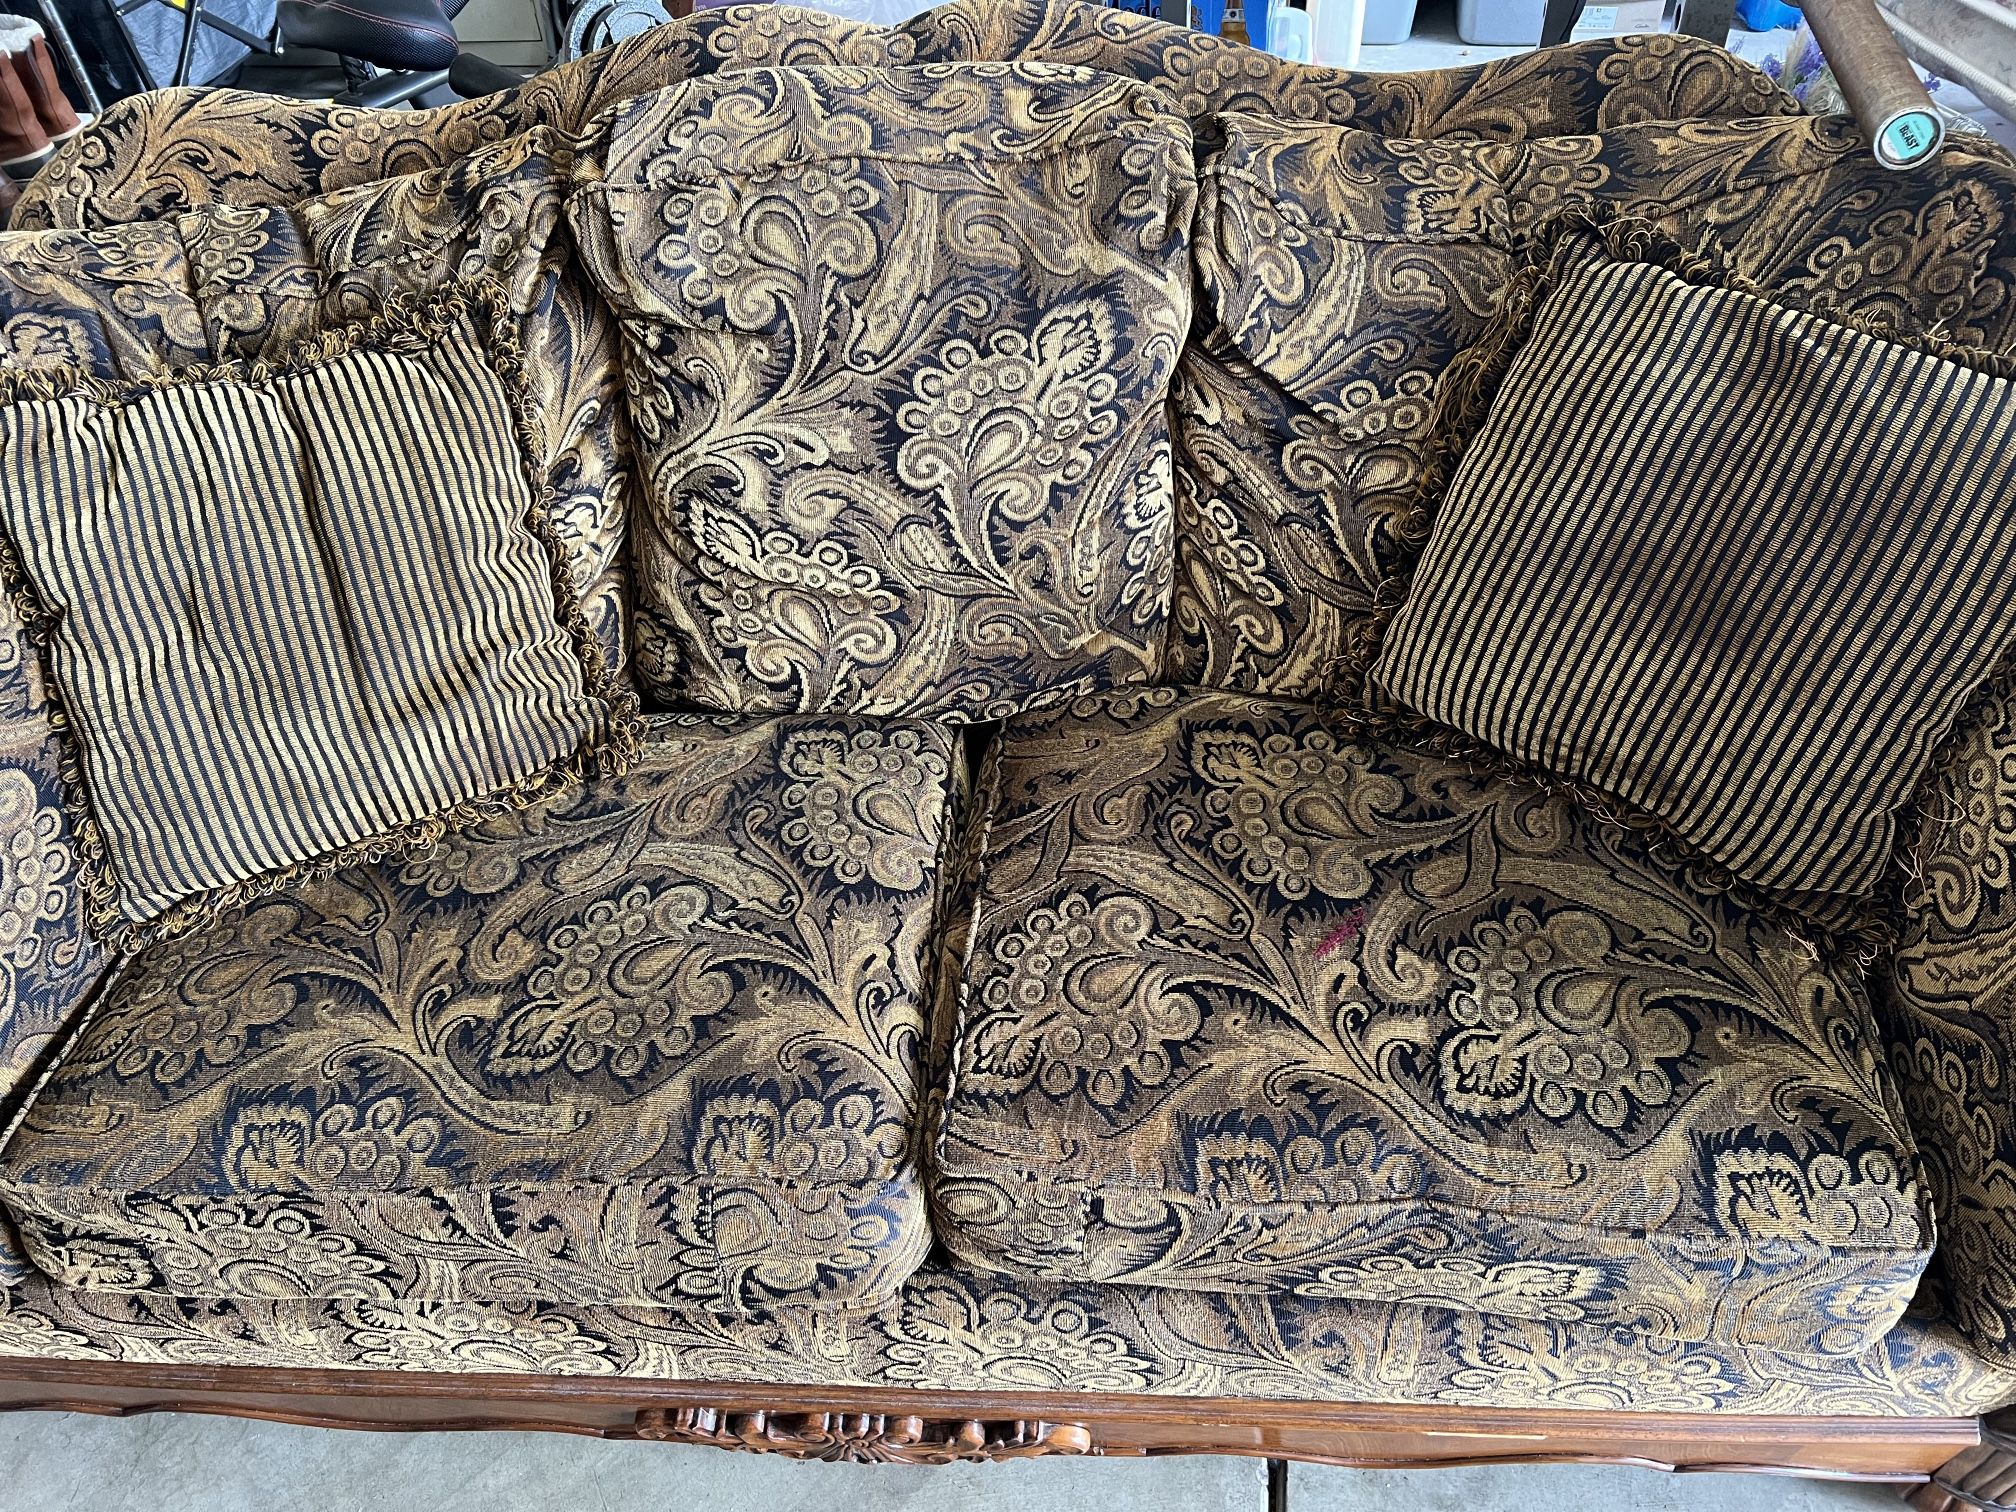 Sofas And Table Set For Sale. Couch (3 seats) ,Loveseat (2 seats) ,Chair 2 side tables,  1 coffee table 